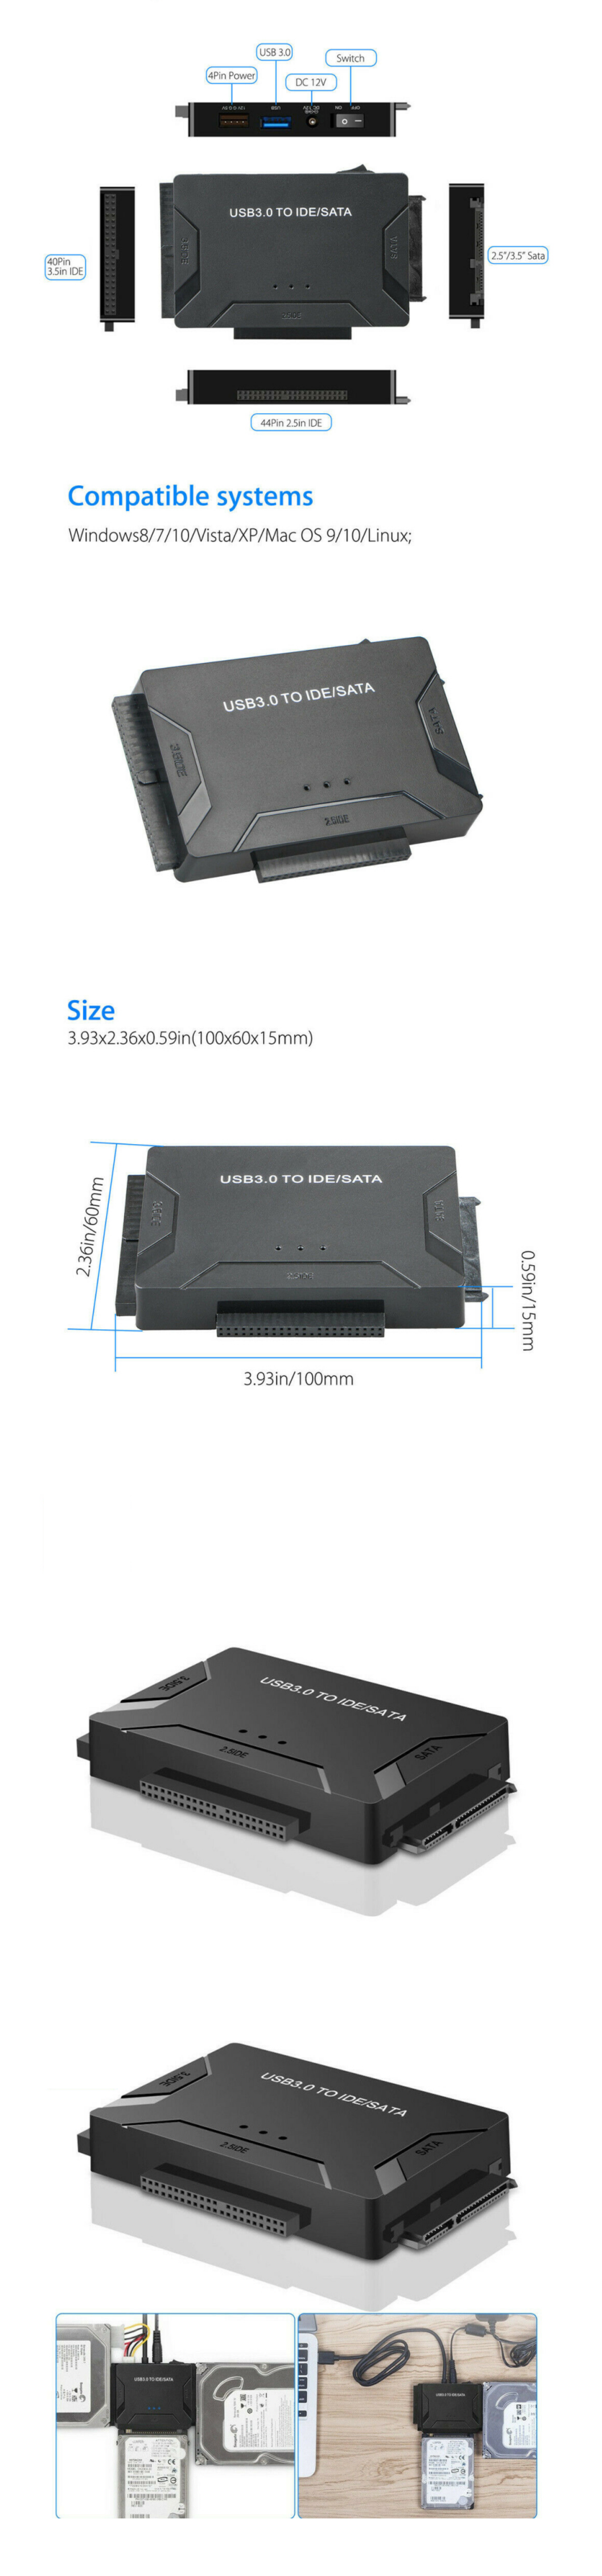 PHIXERO SATA to USB 3.0 Adapter for 2.5/3.5 inch HDD/SSD Support UASP,SATA  to USB with 12V/2A Power Adapter for SATA I/II/III,USB to SATA Adapter